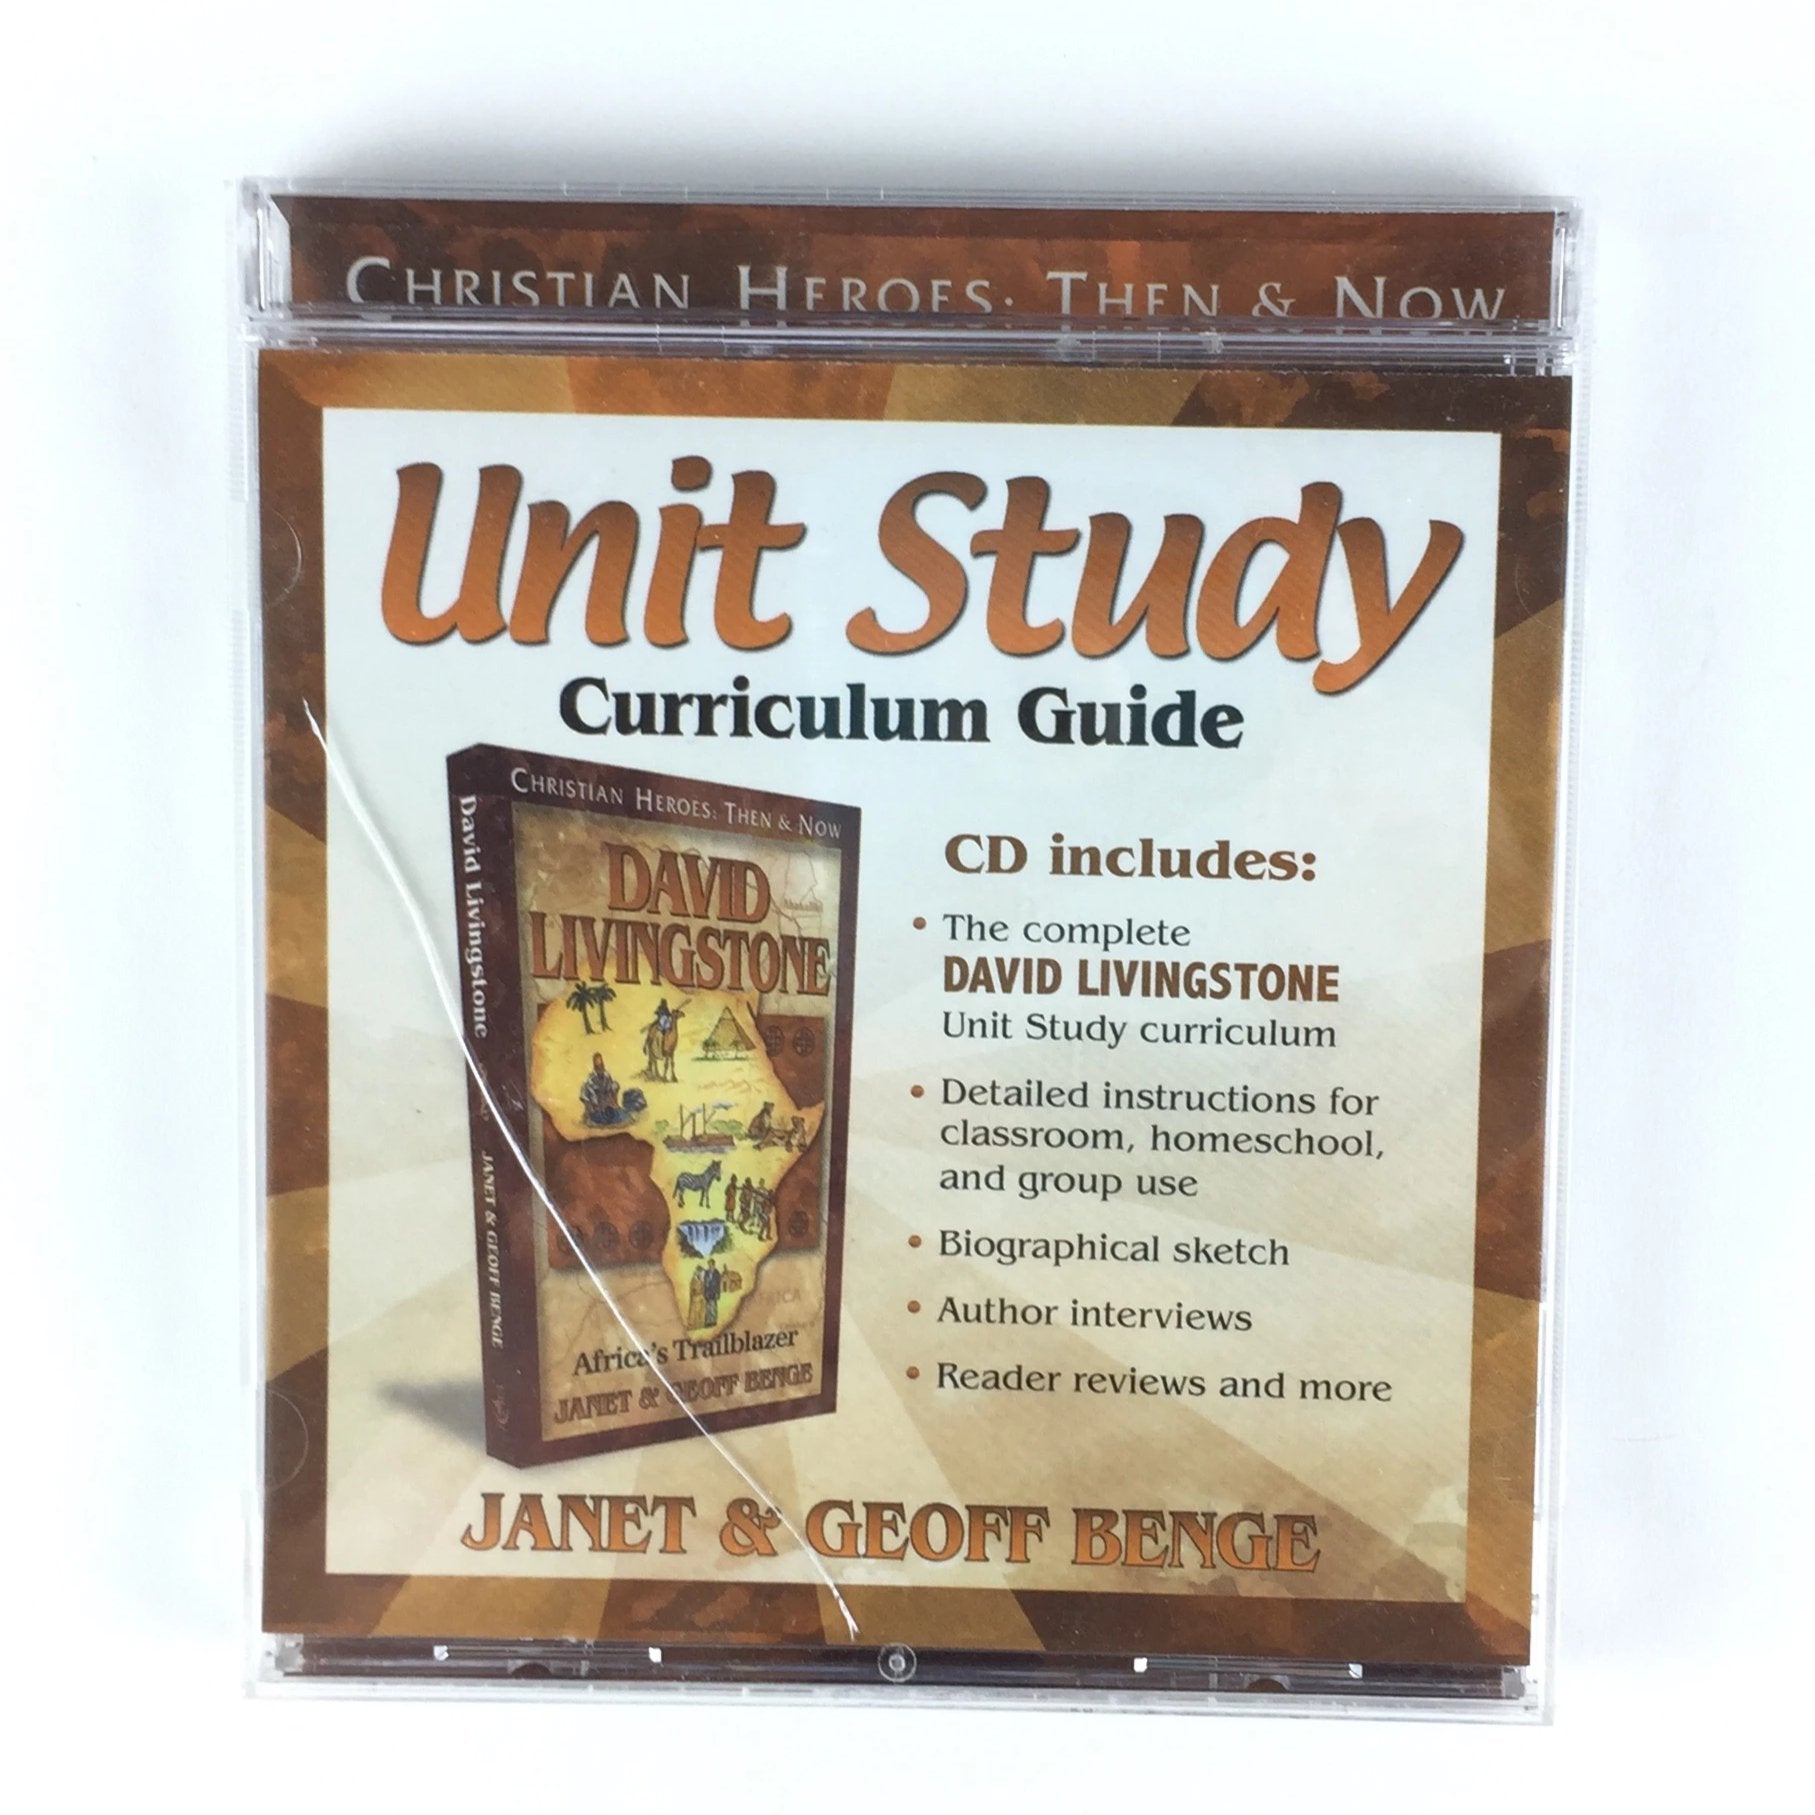 David Livingstone: Unit Study Curriculum Guide CD by Janet and Geoff Benge